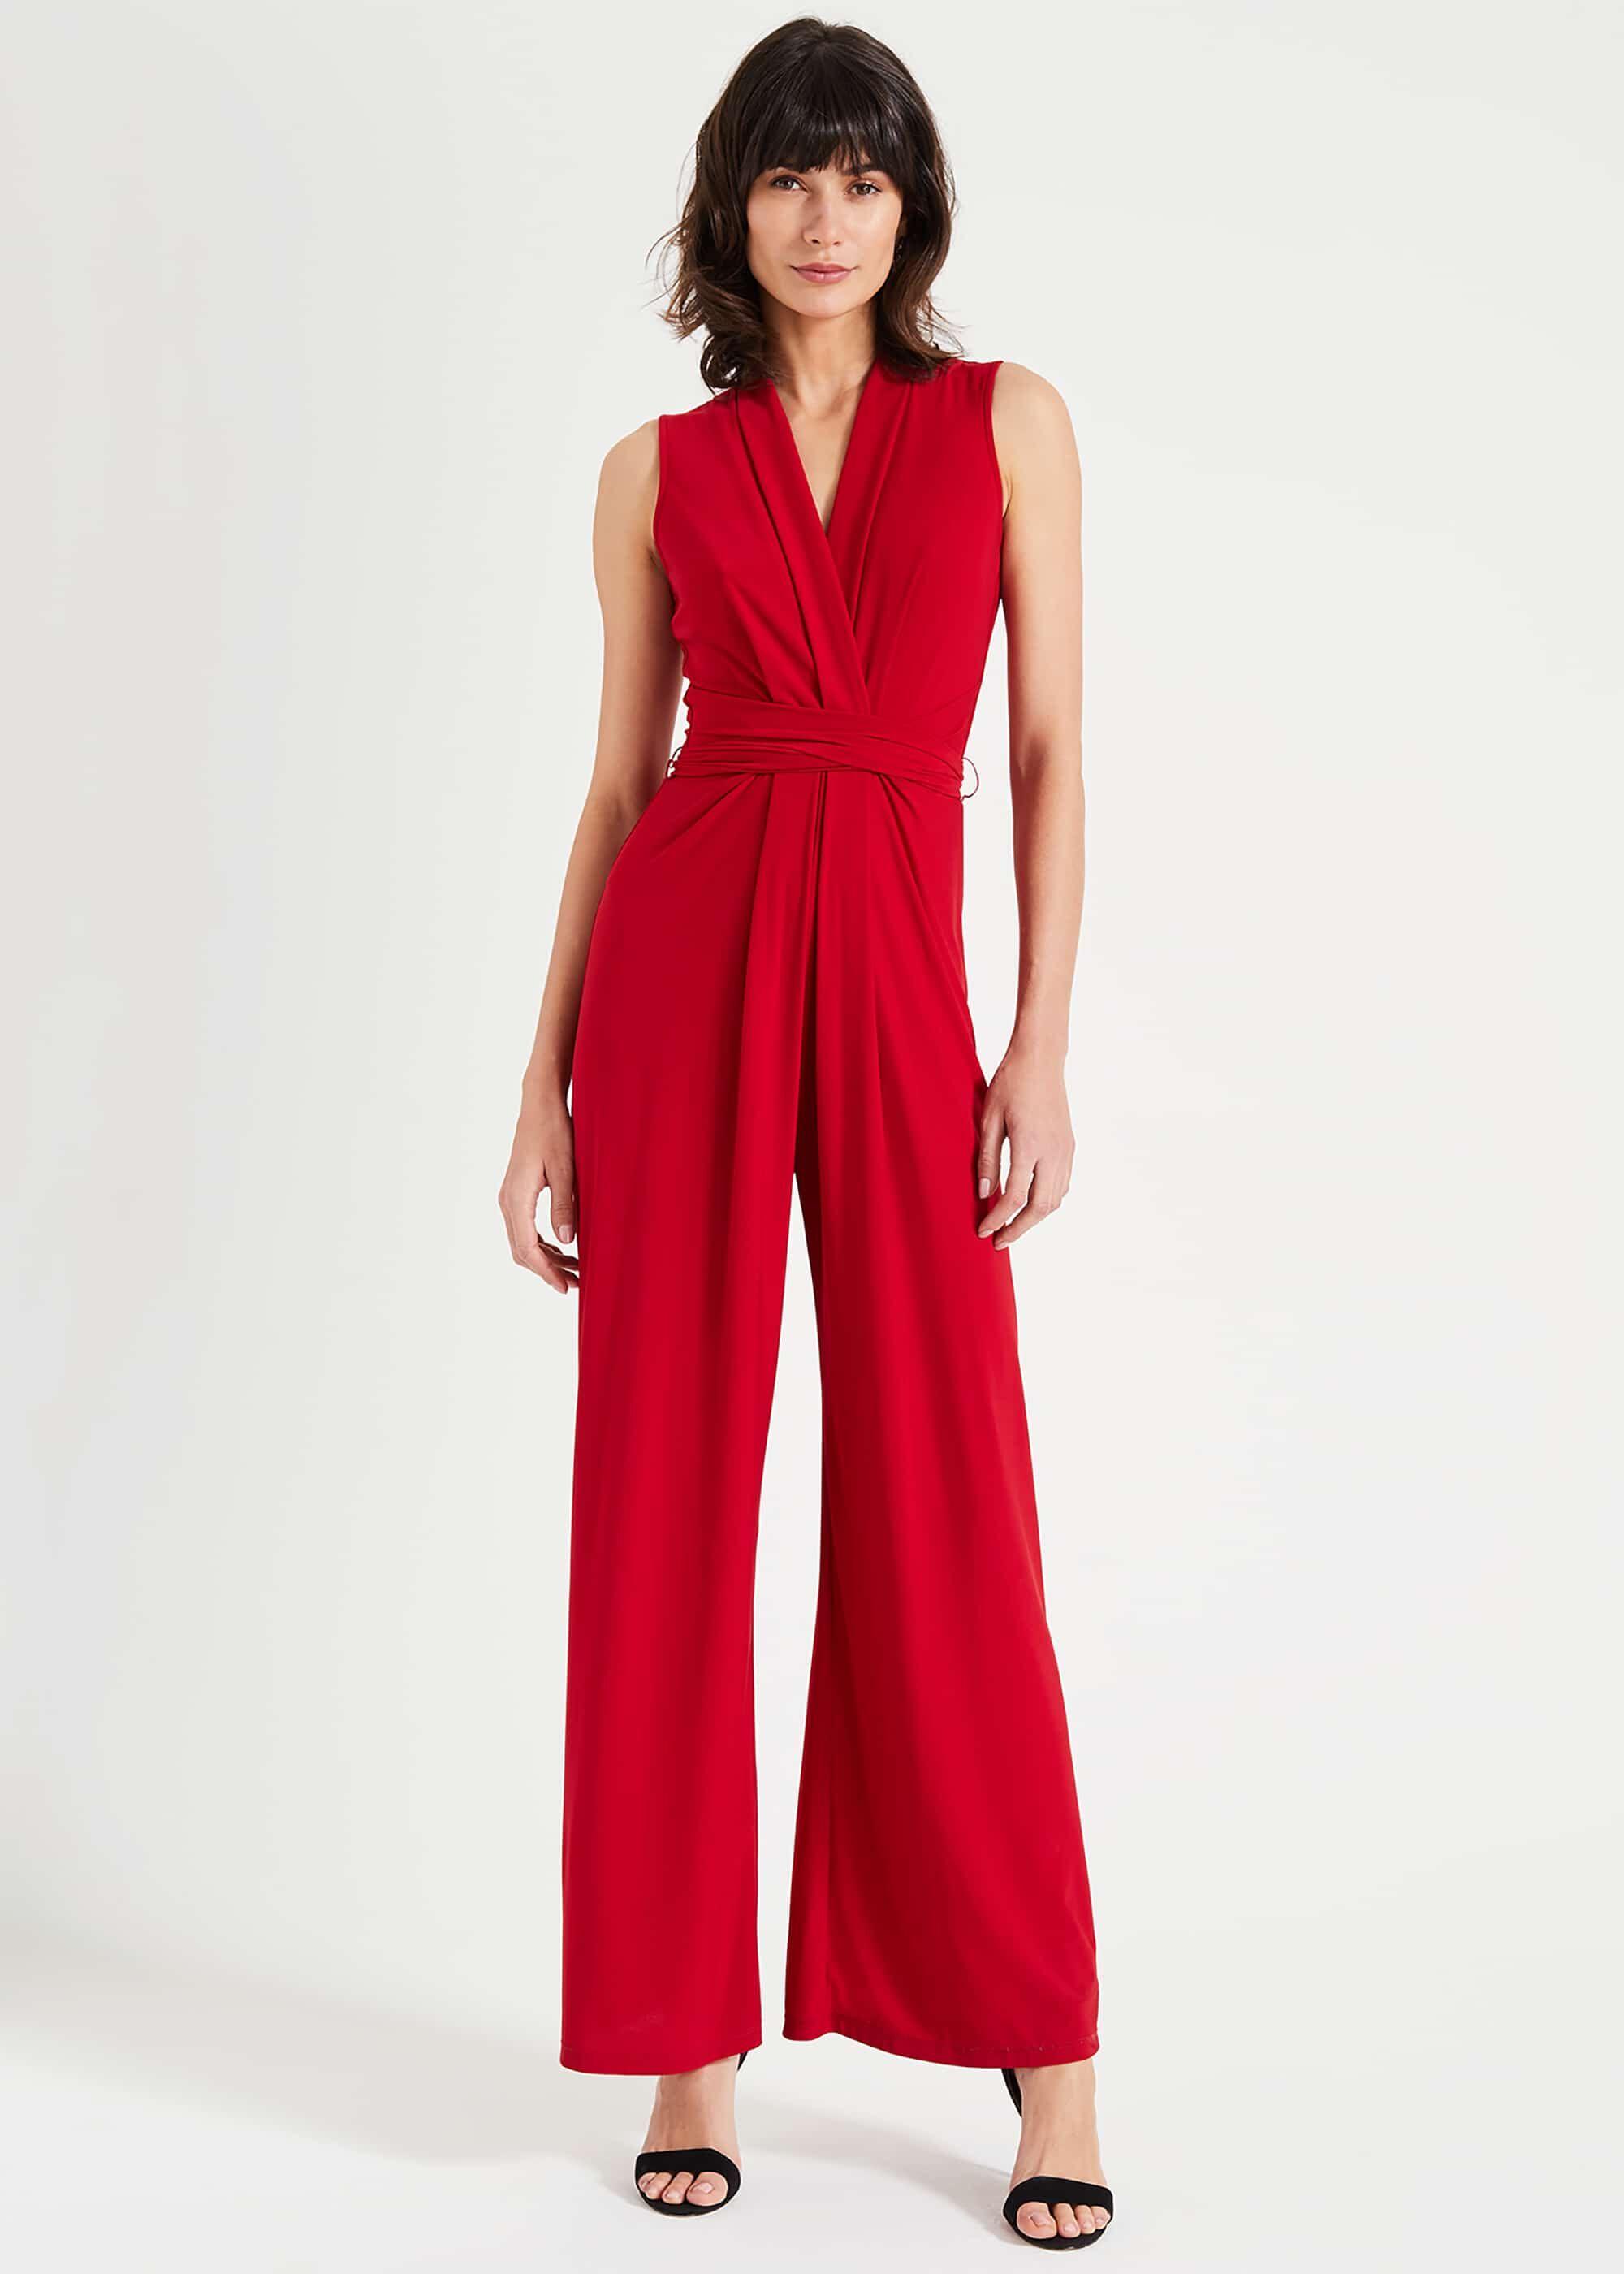 Phase Eight Synthetic Tia Sleeveless Jumpsuit in Scarlet (Red) - Save ...